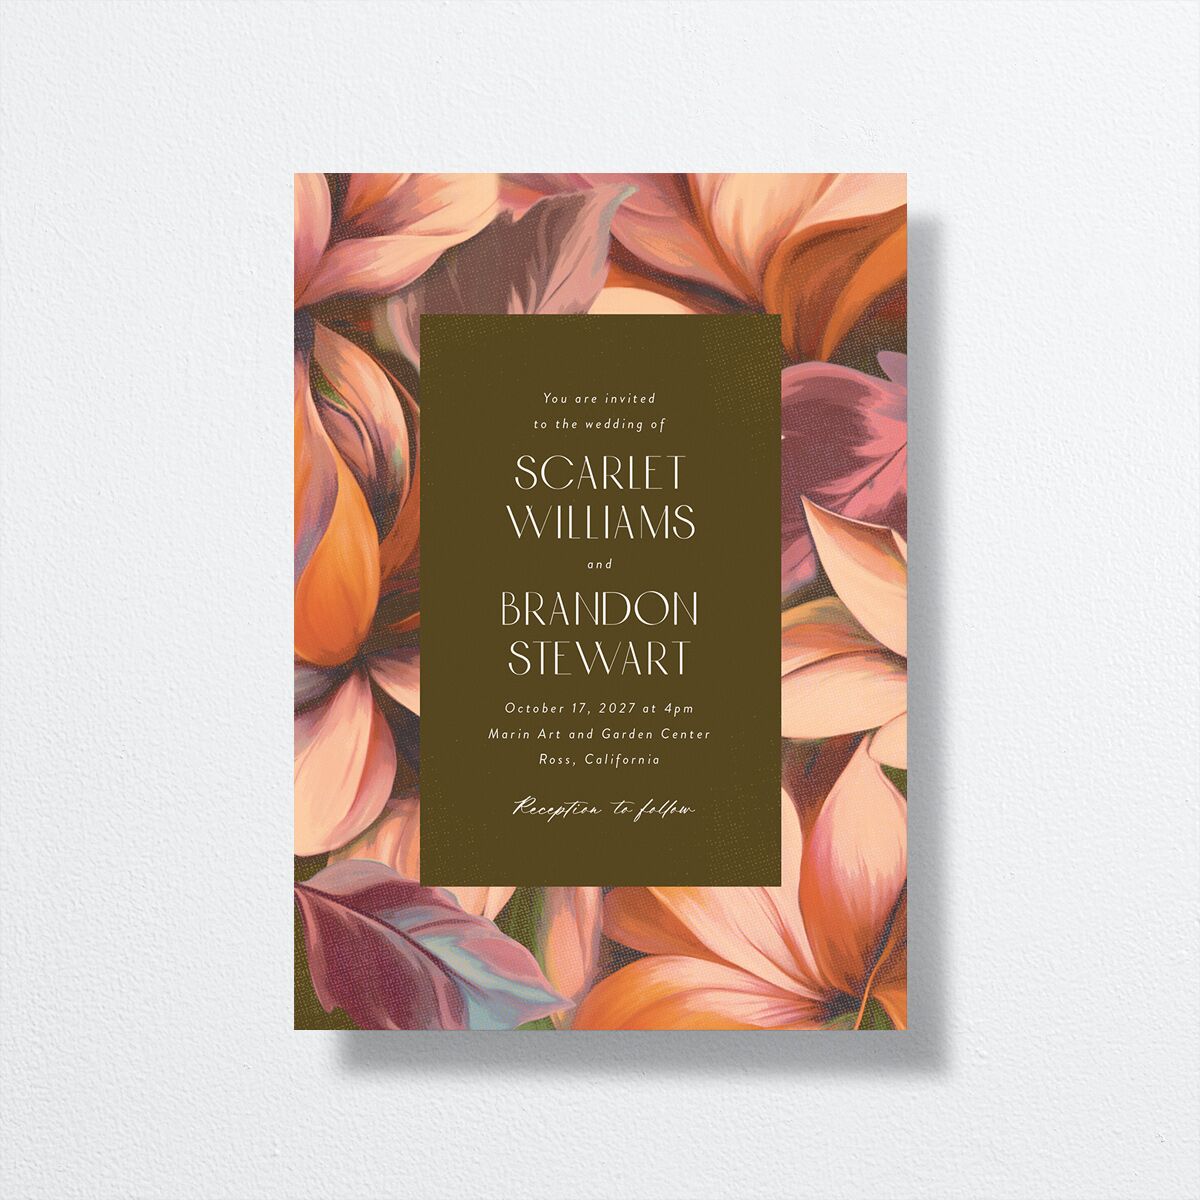 Falling In Love Wedding Invitations front